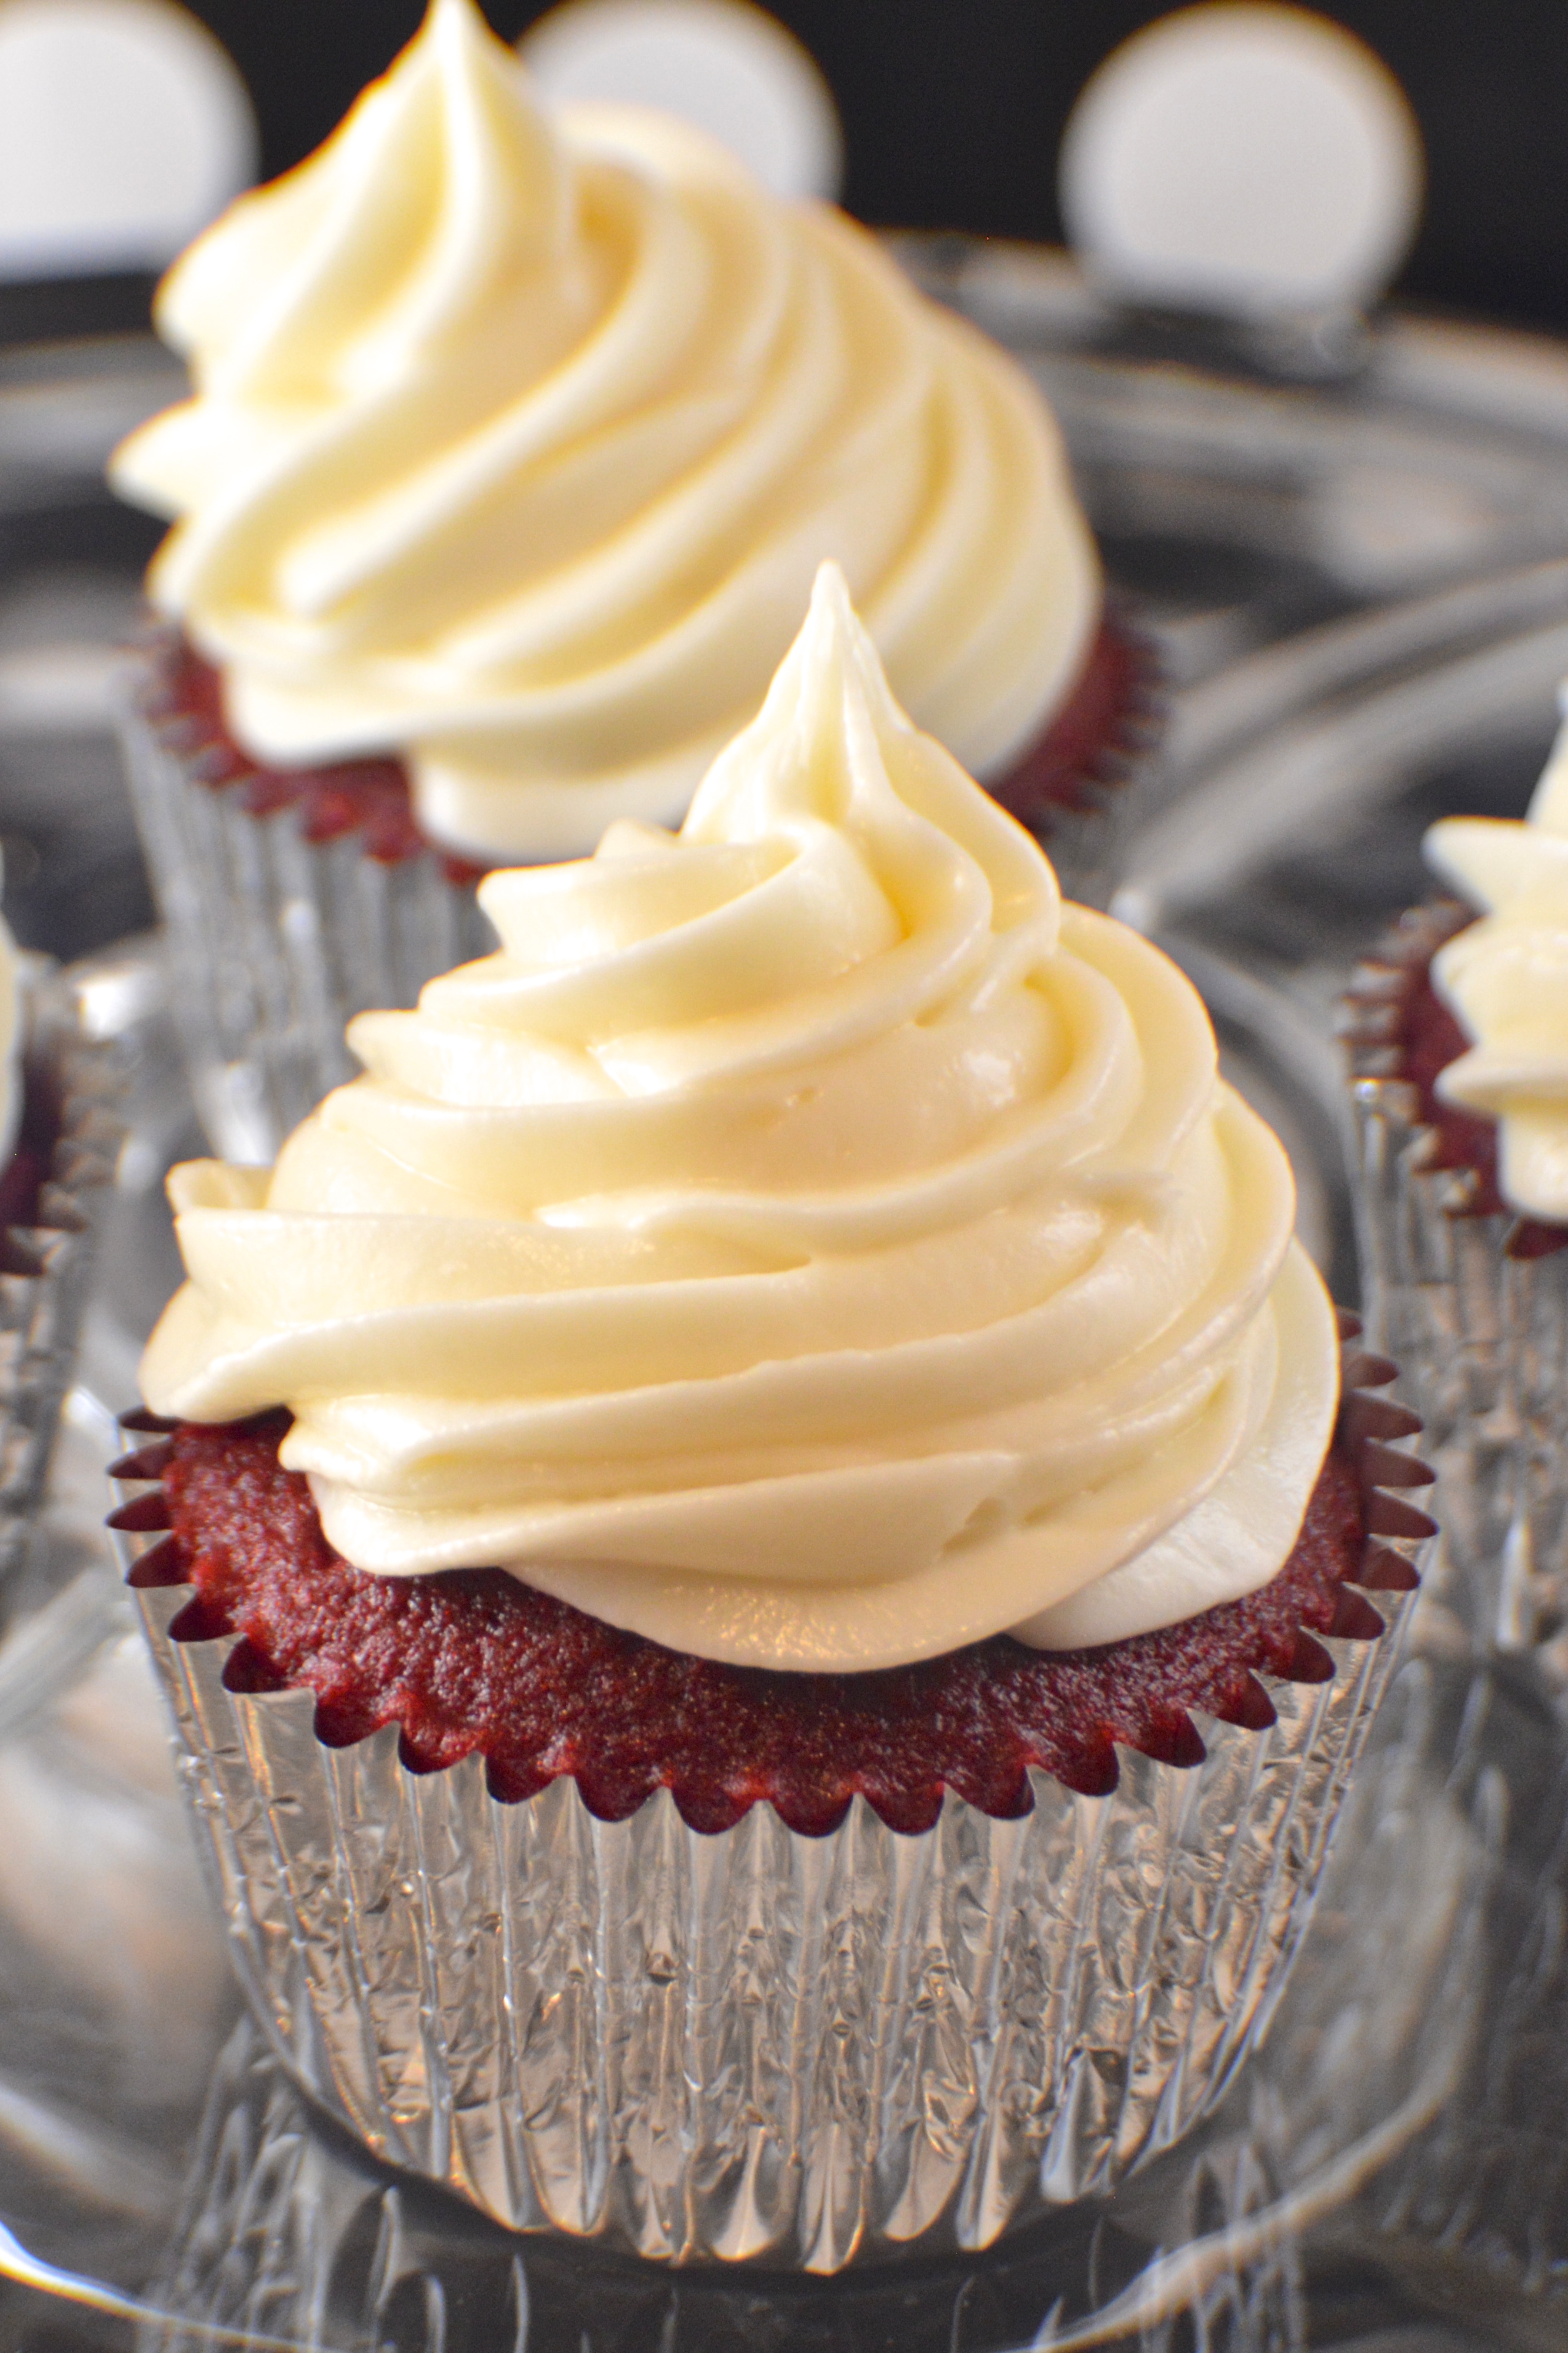 Homemade Cupcakes with Cream Cheese Frosting